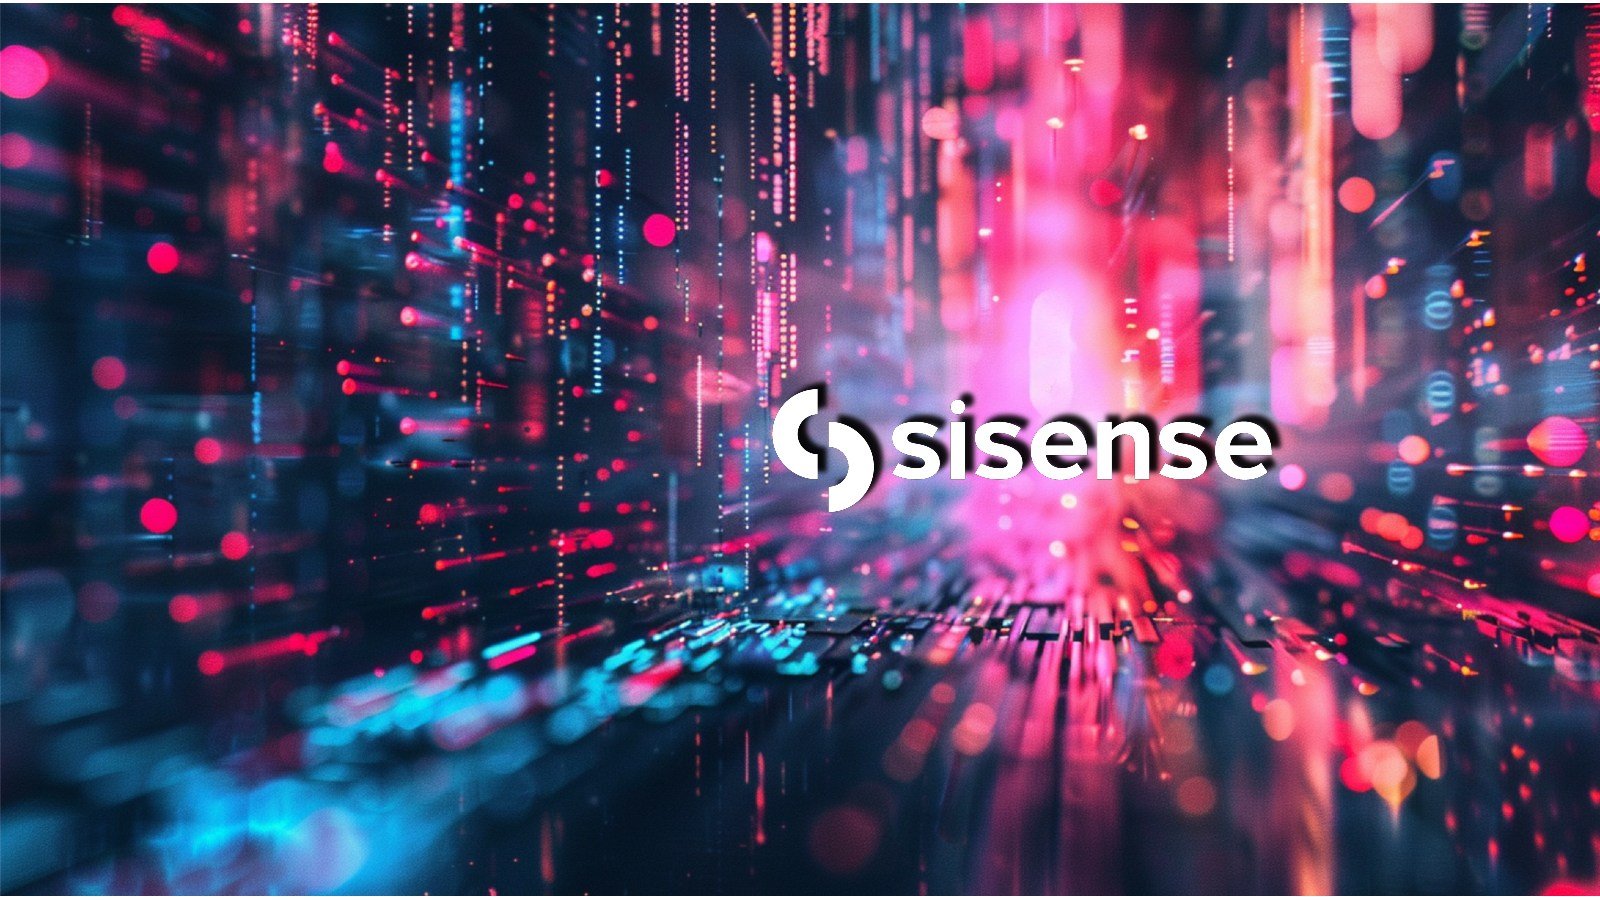 CISA investigates critical infrastructure breach after Sisense hack